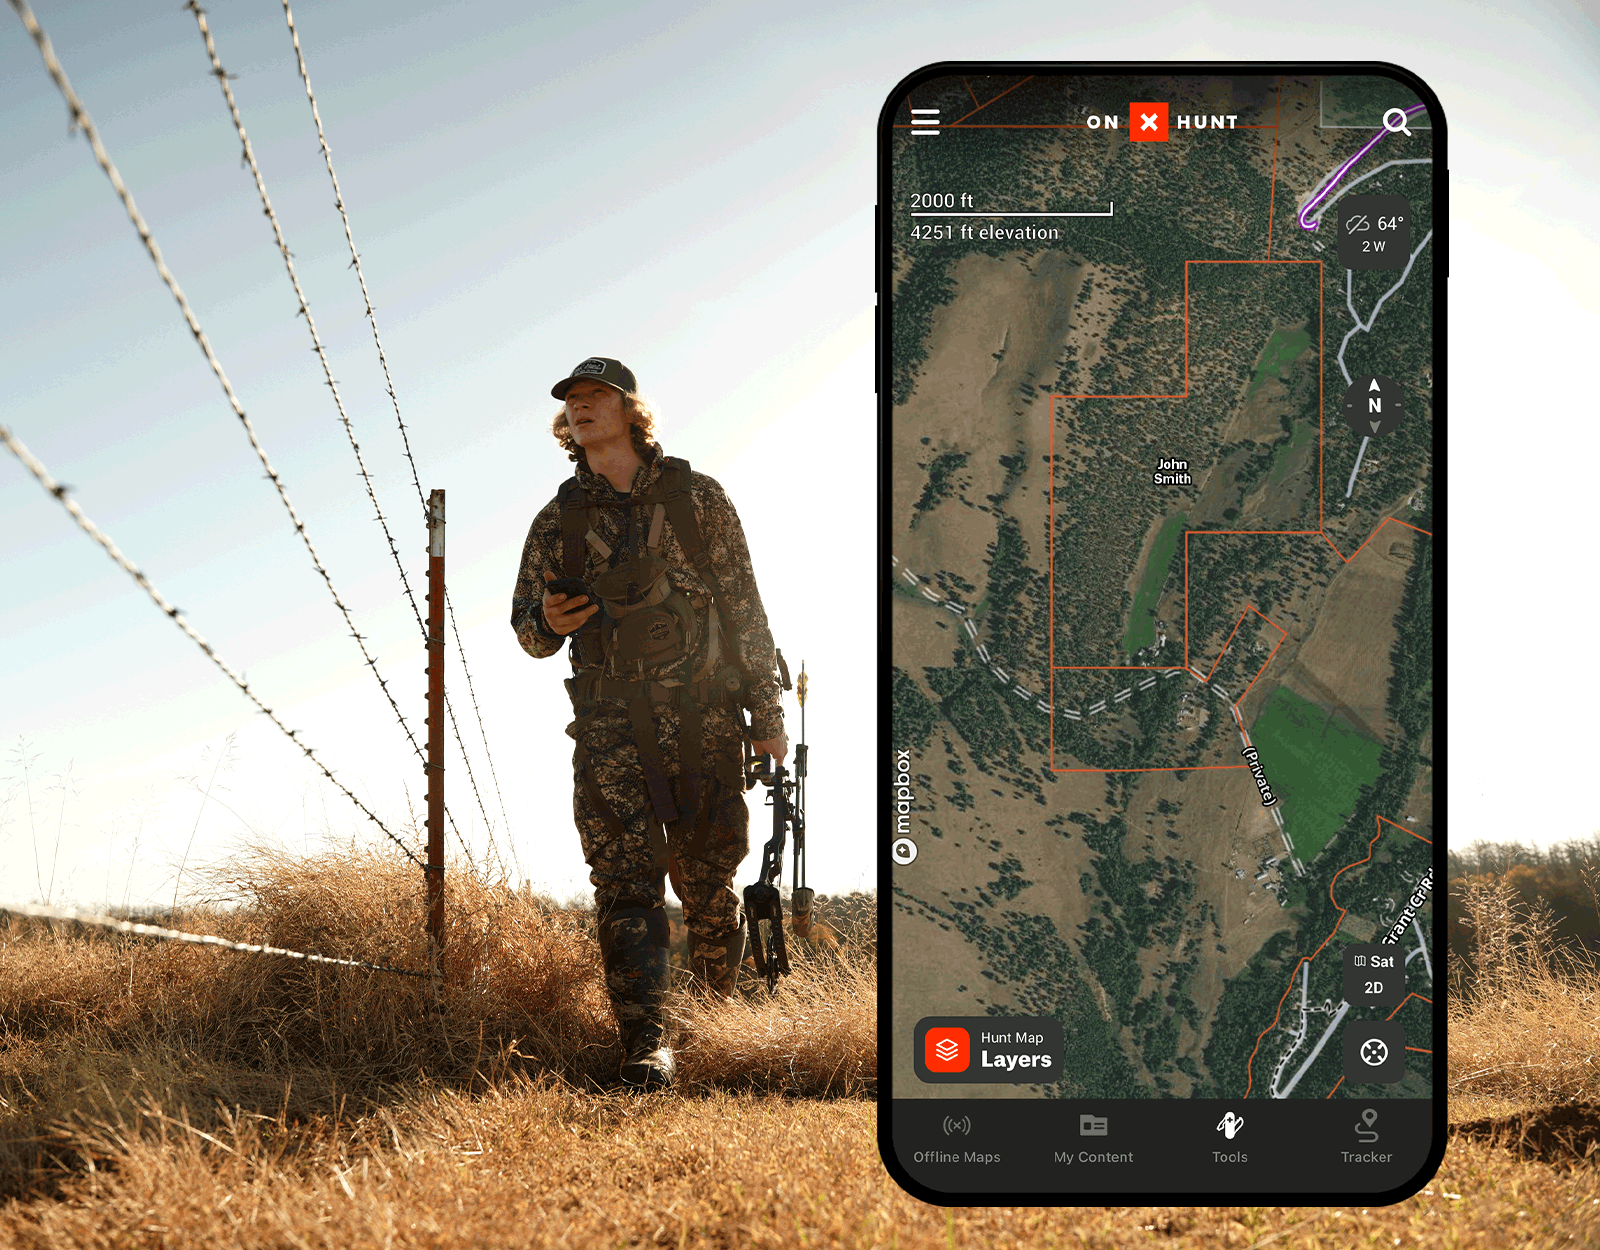 bowhunter walking alongside fence with onX Hunt private property information shown in phone